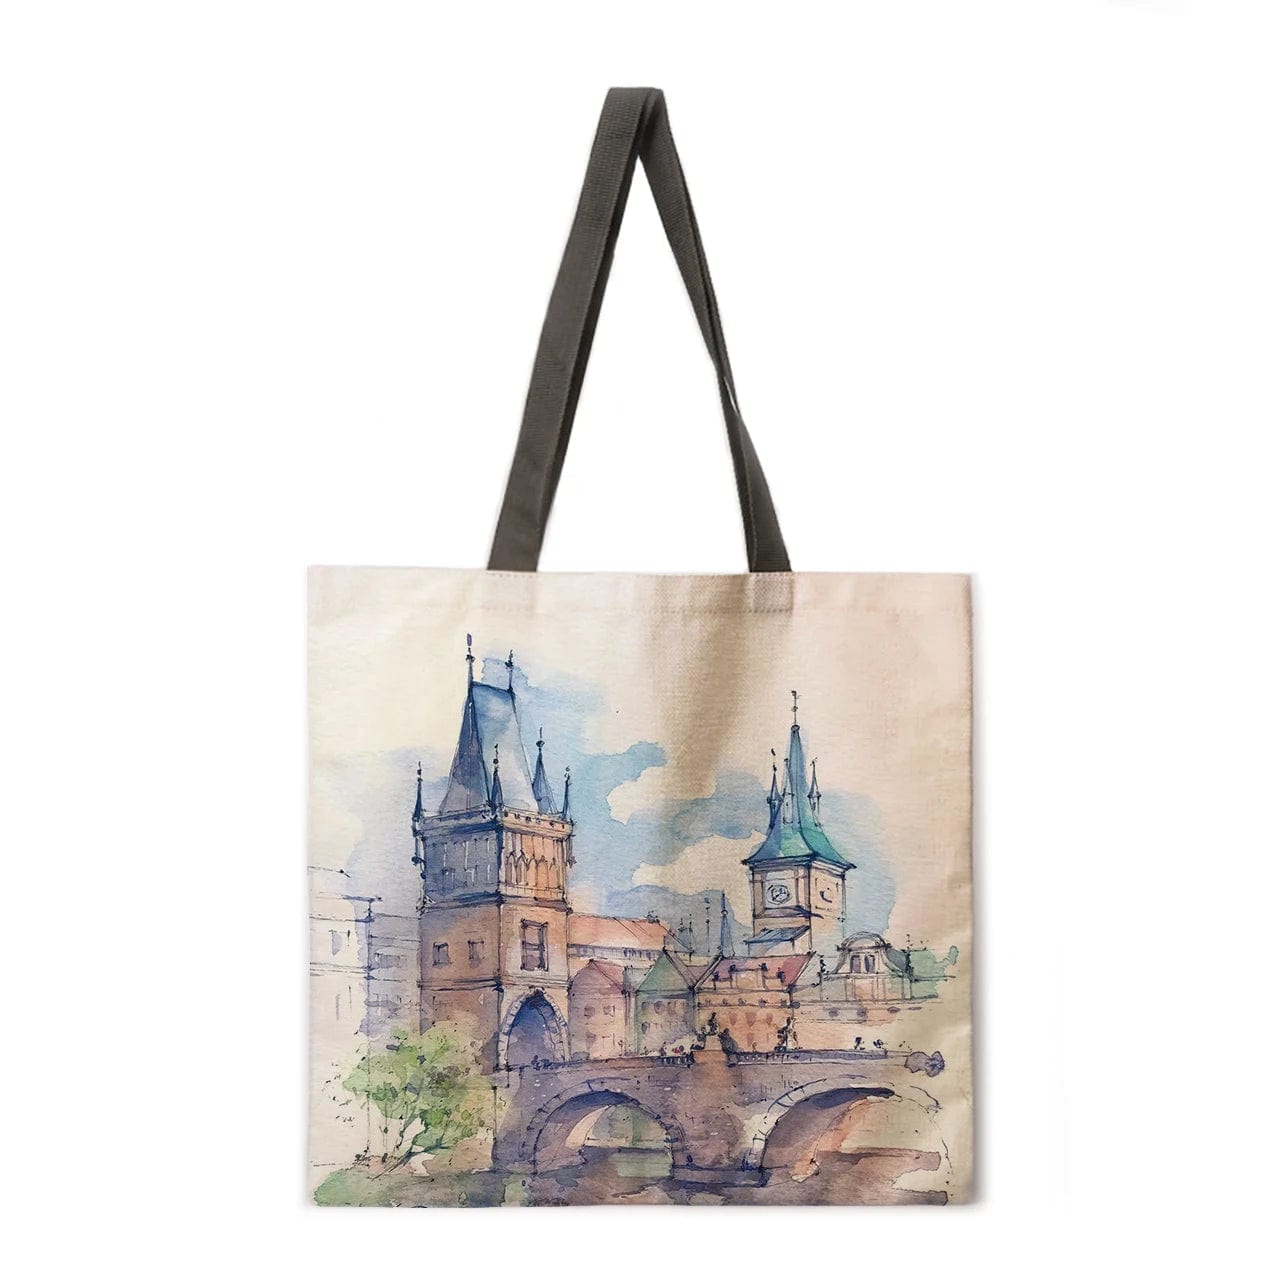 Oil painting construction tote